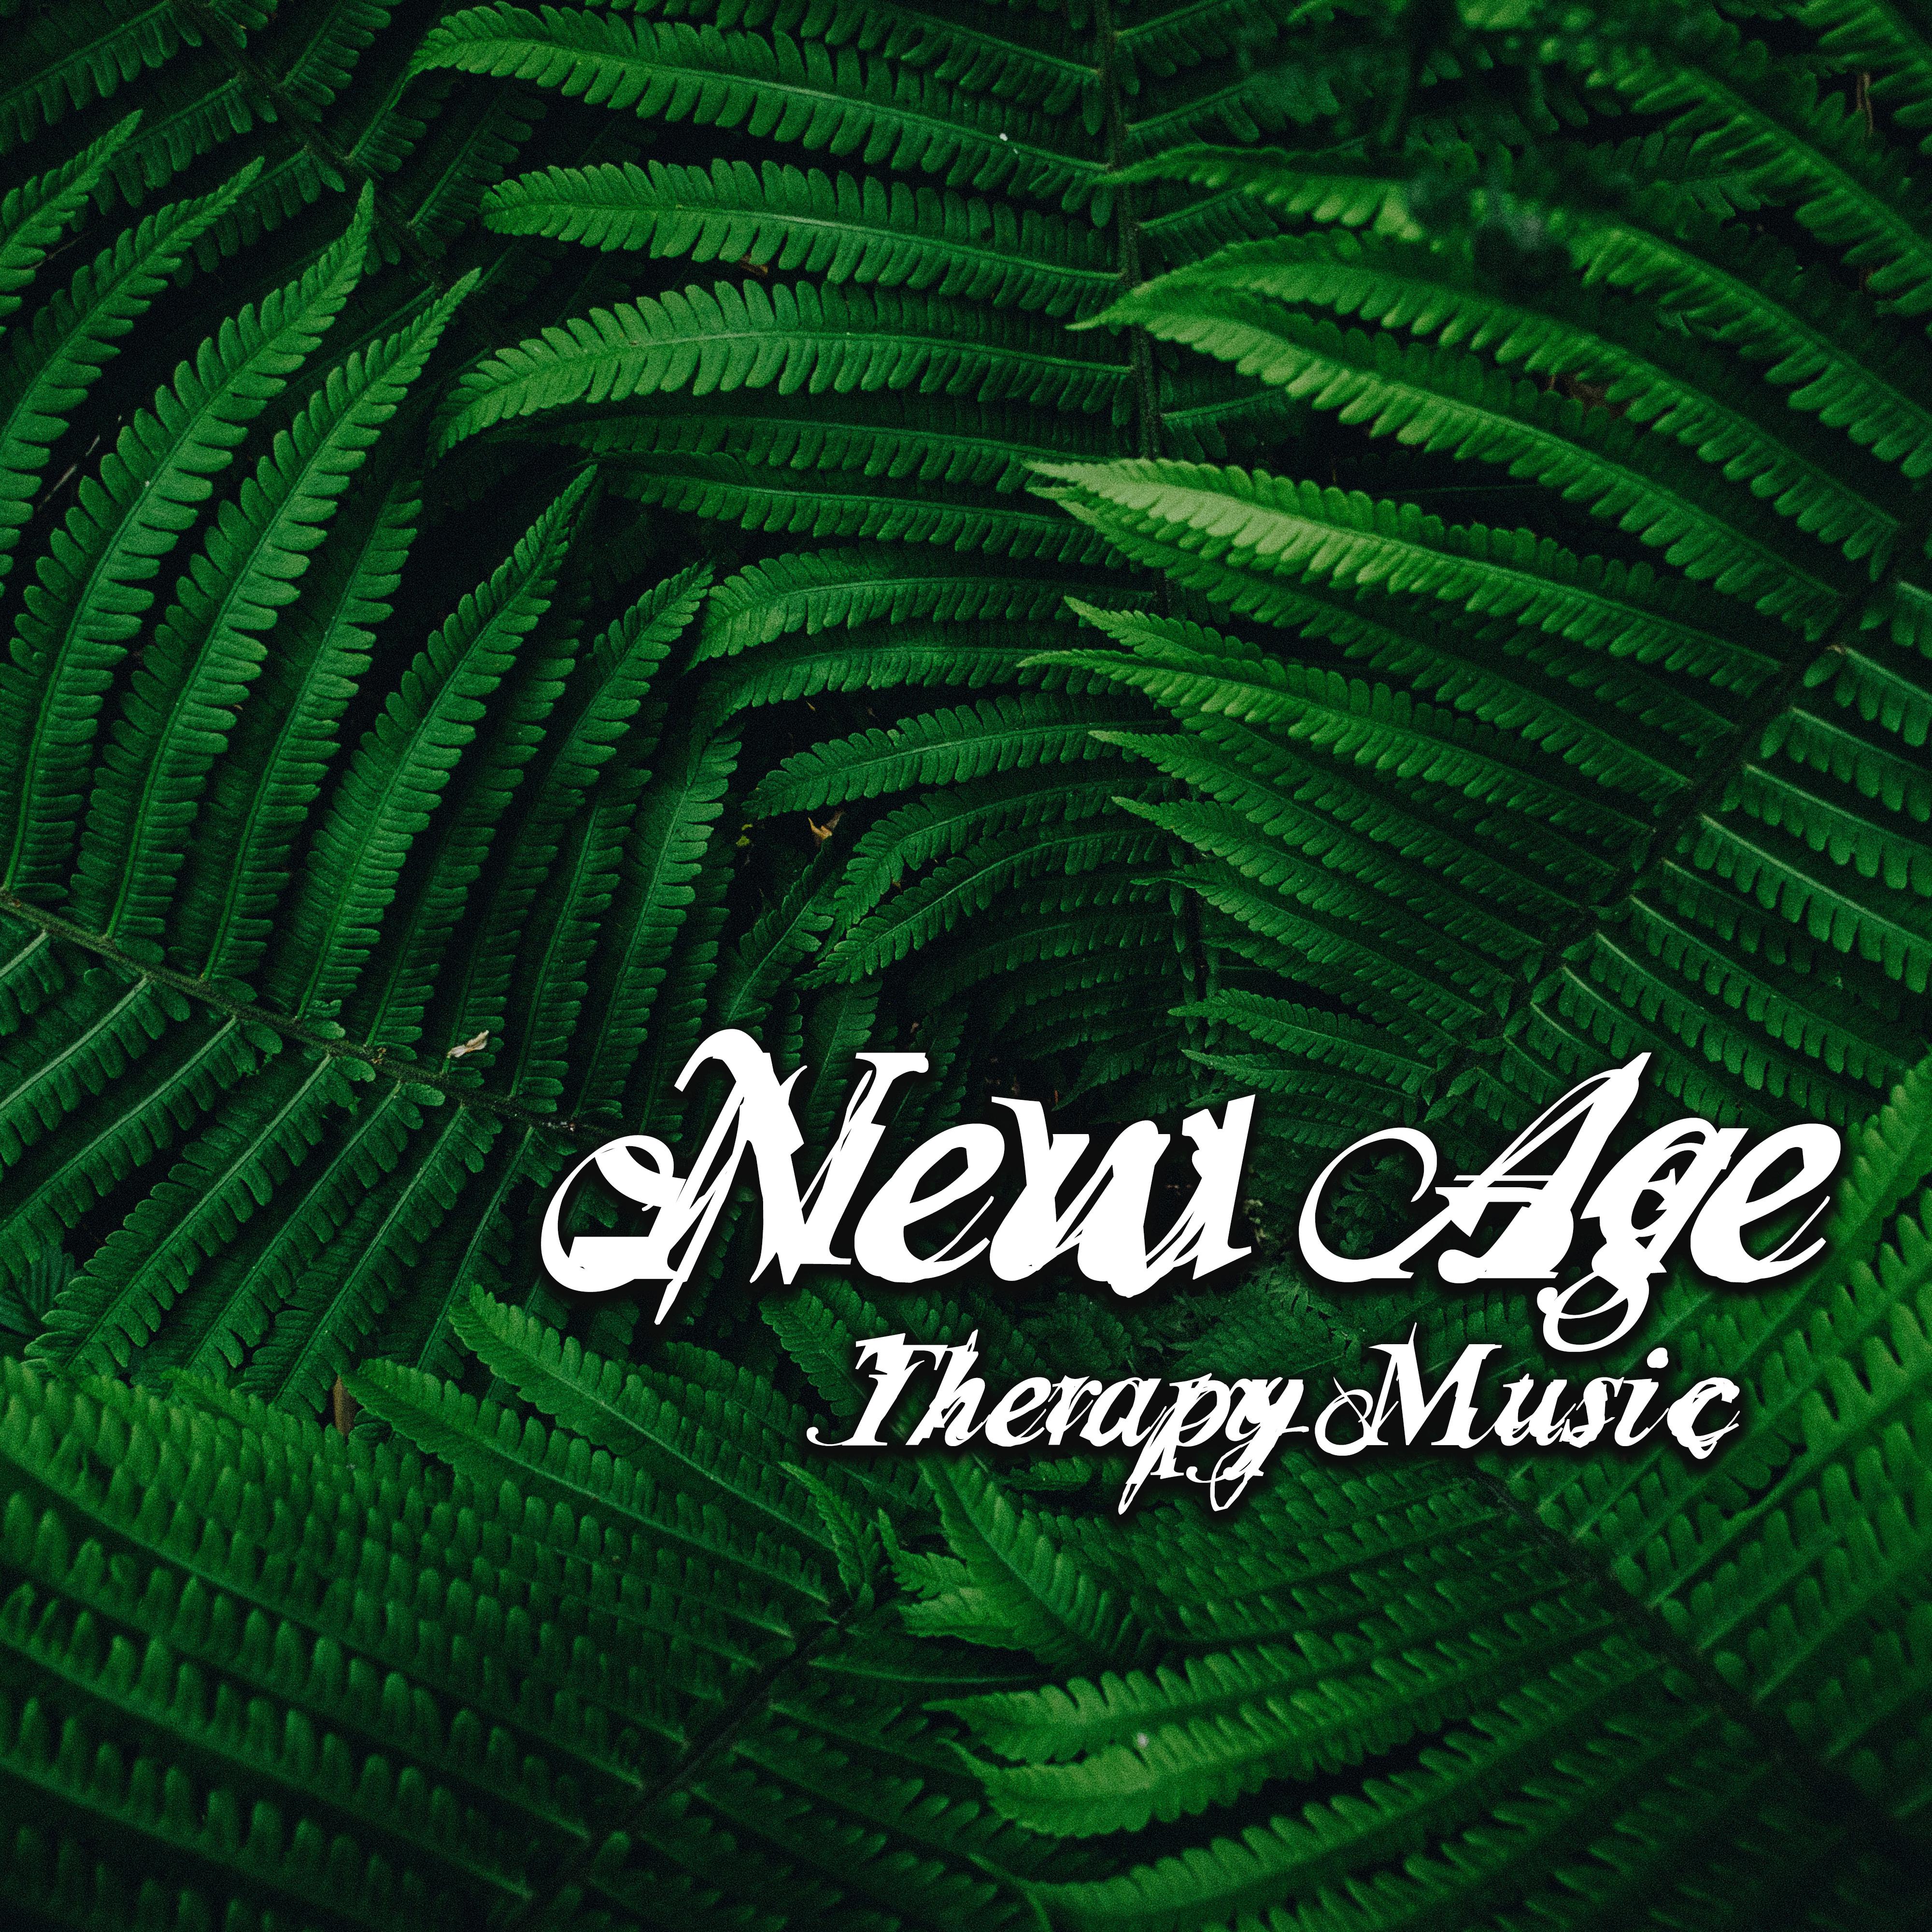 New Age Therapy Music – Calming Sounds of Nature, Music for Relax, Relief Stress, Zen